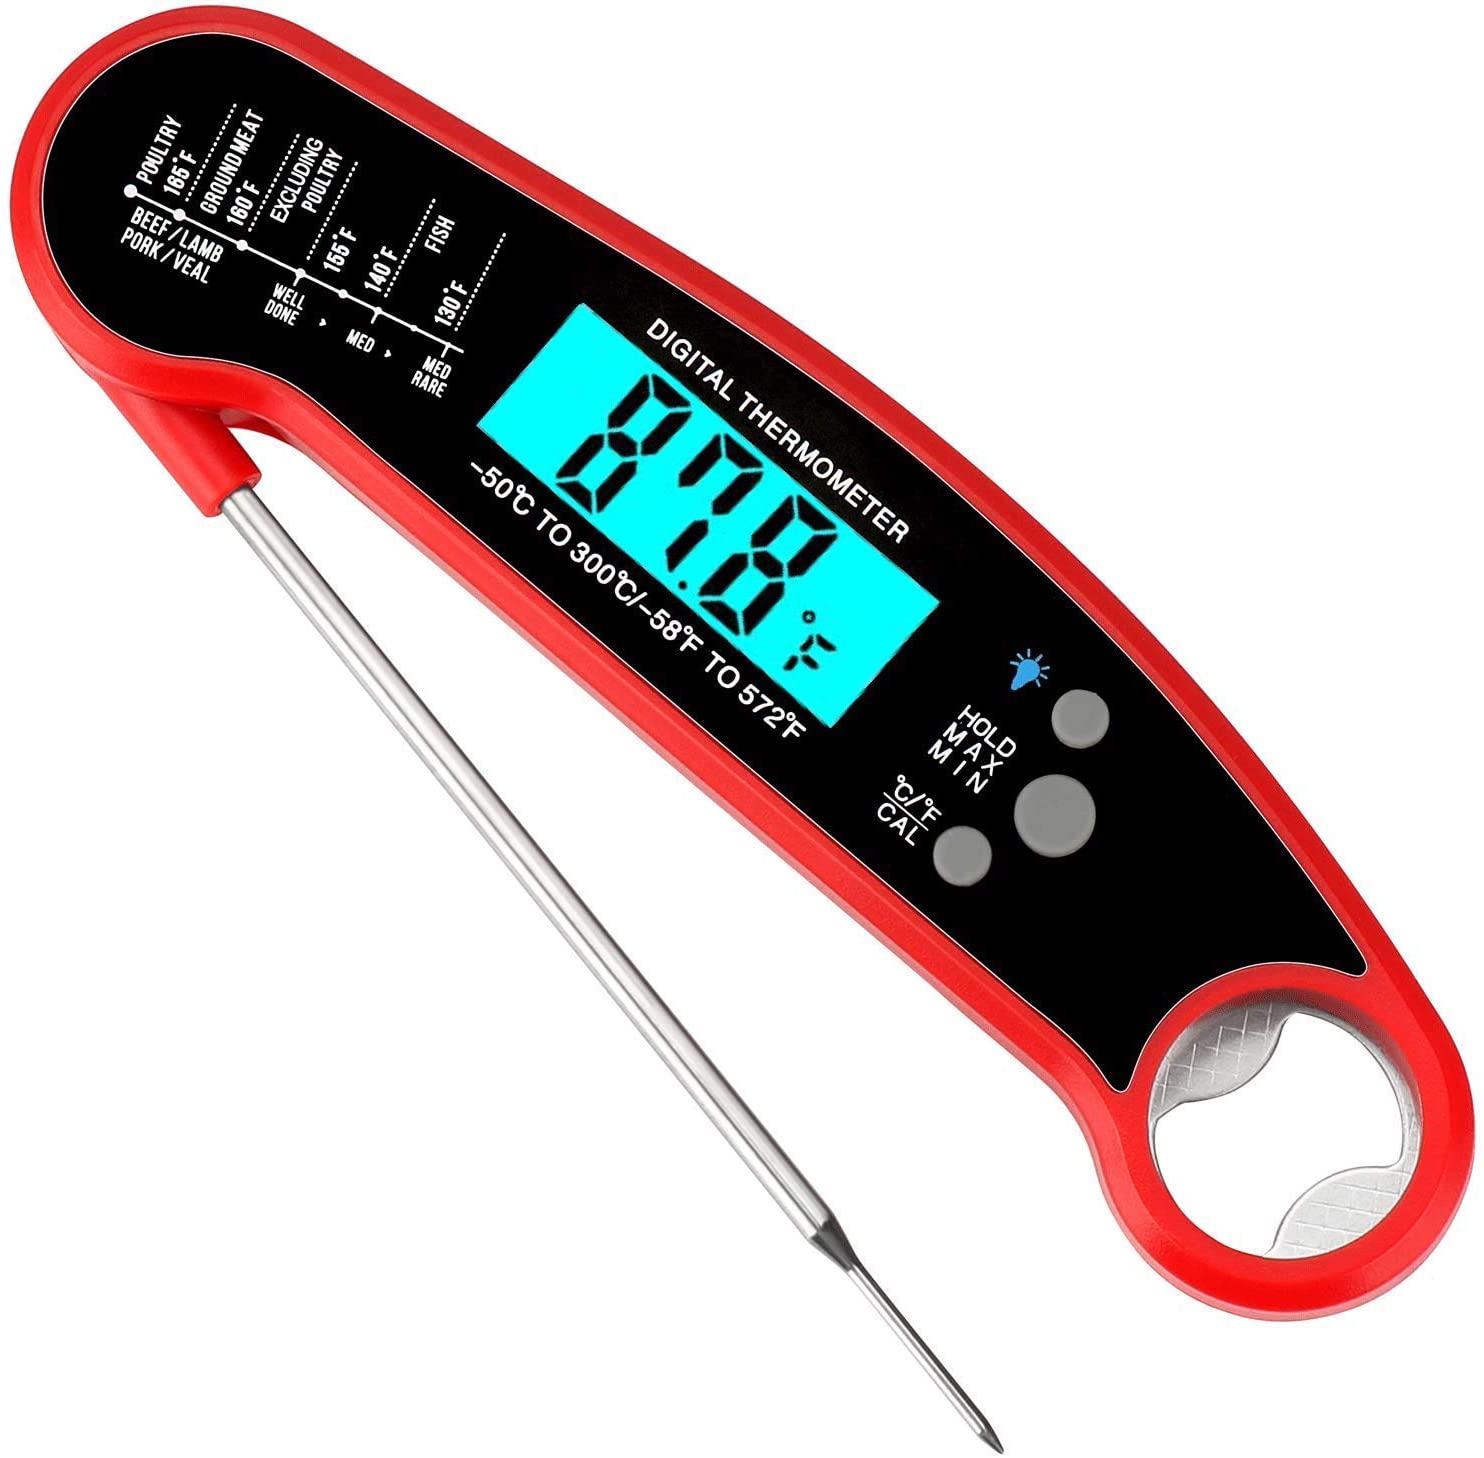 A digital meat thermometer